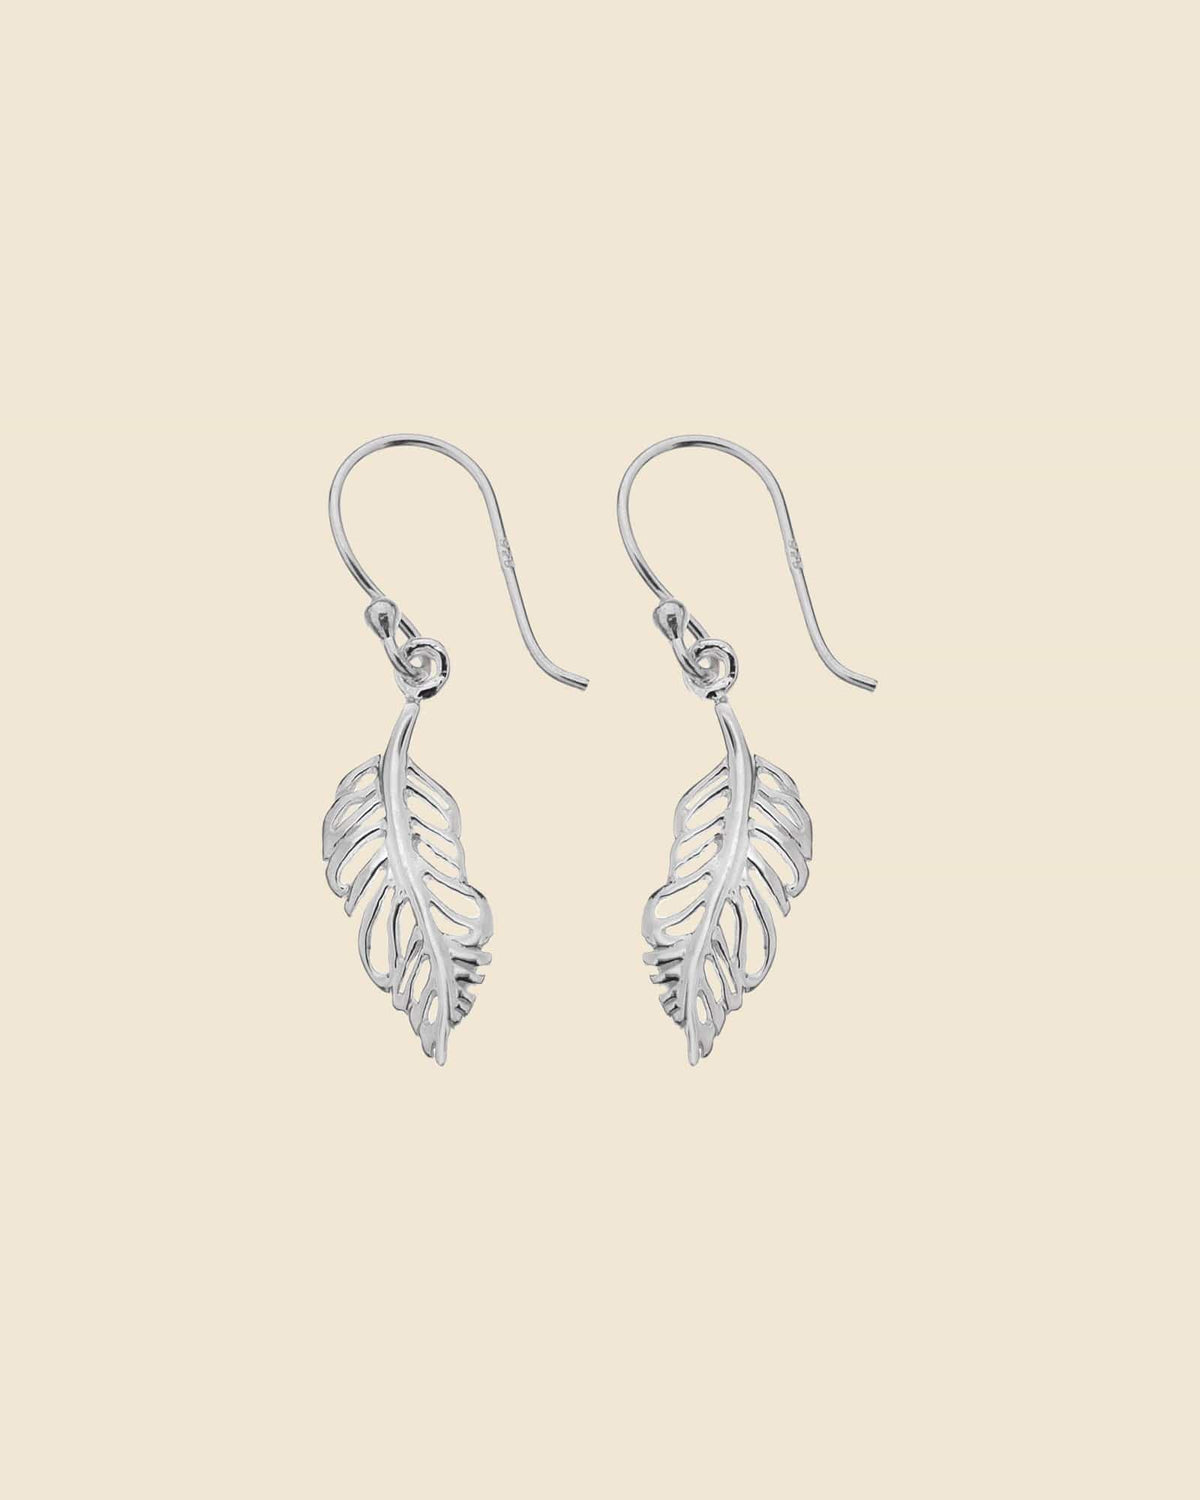 Spiral Earrings - One Piece Design in Sterling Silver. – The